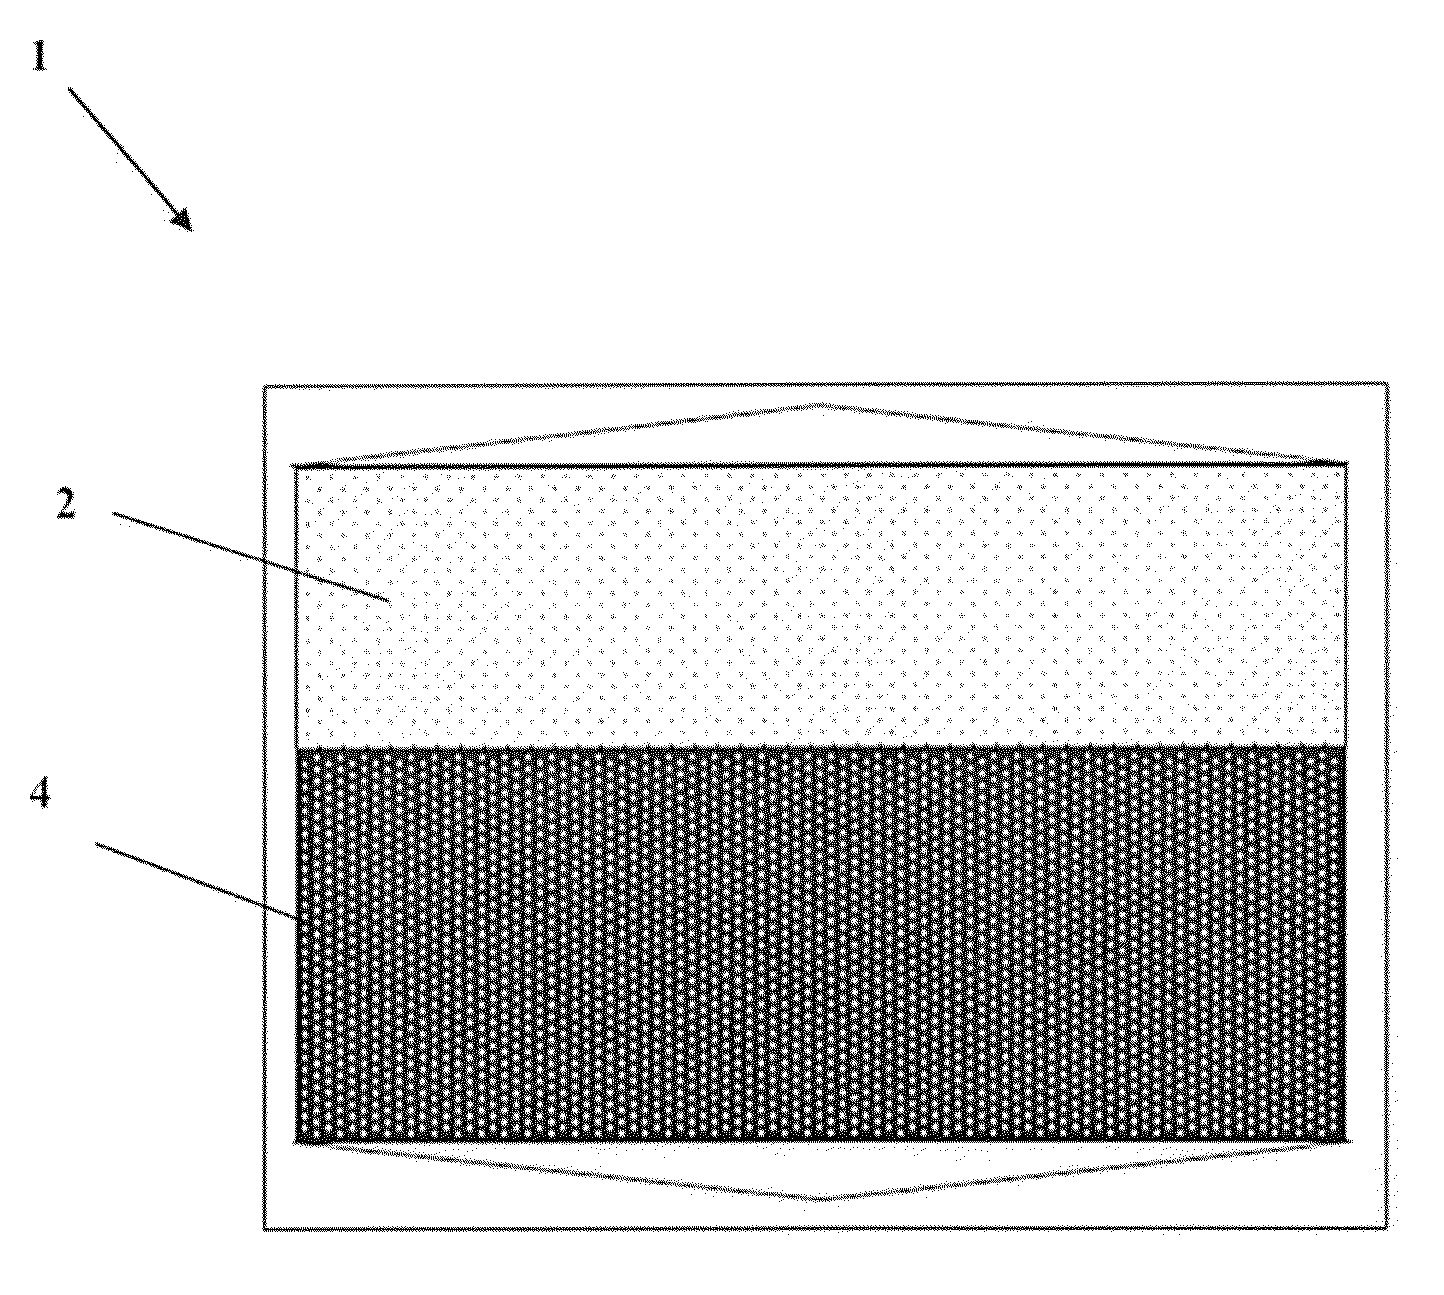 Multilayered mixed bed filter for the removal of toxic gases from air streams and methods thereof